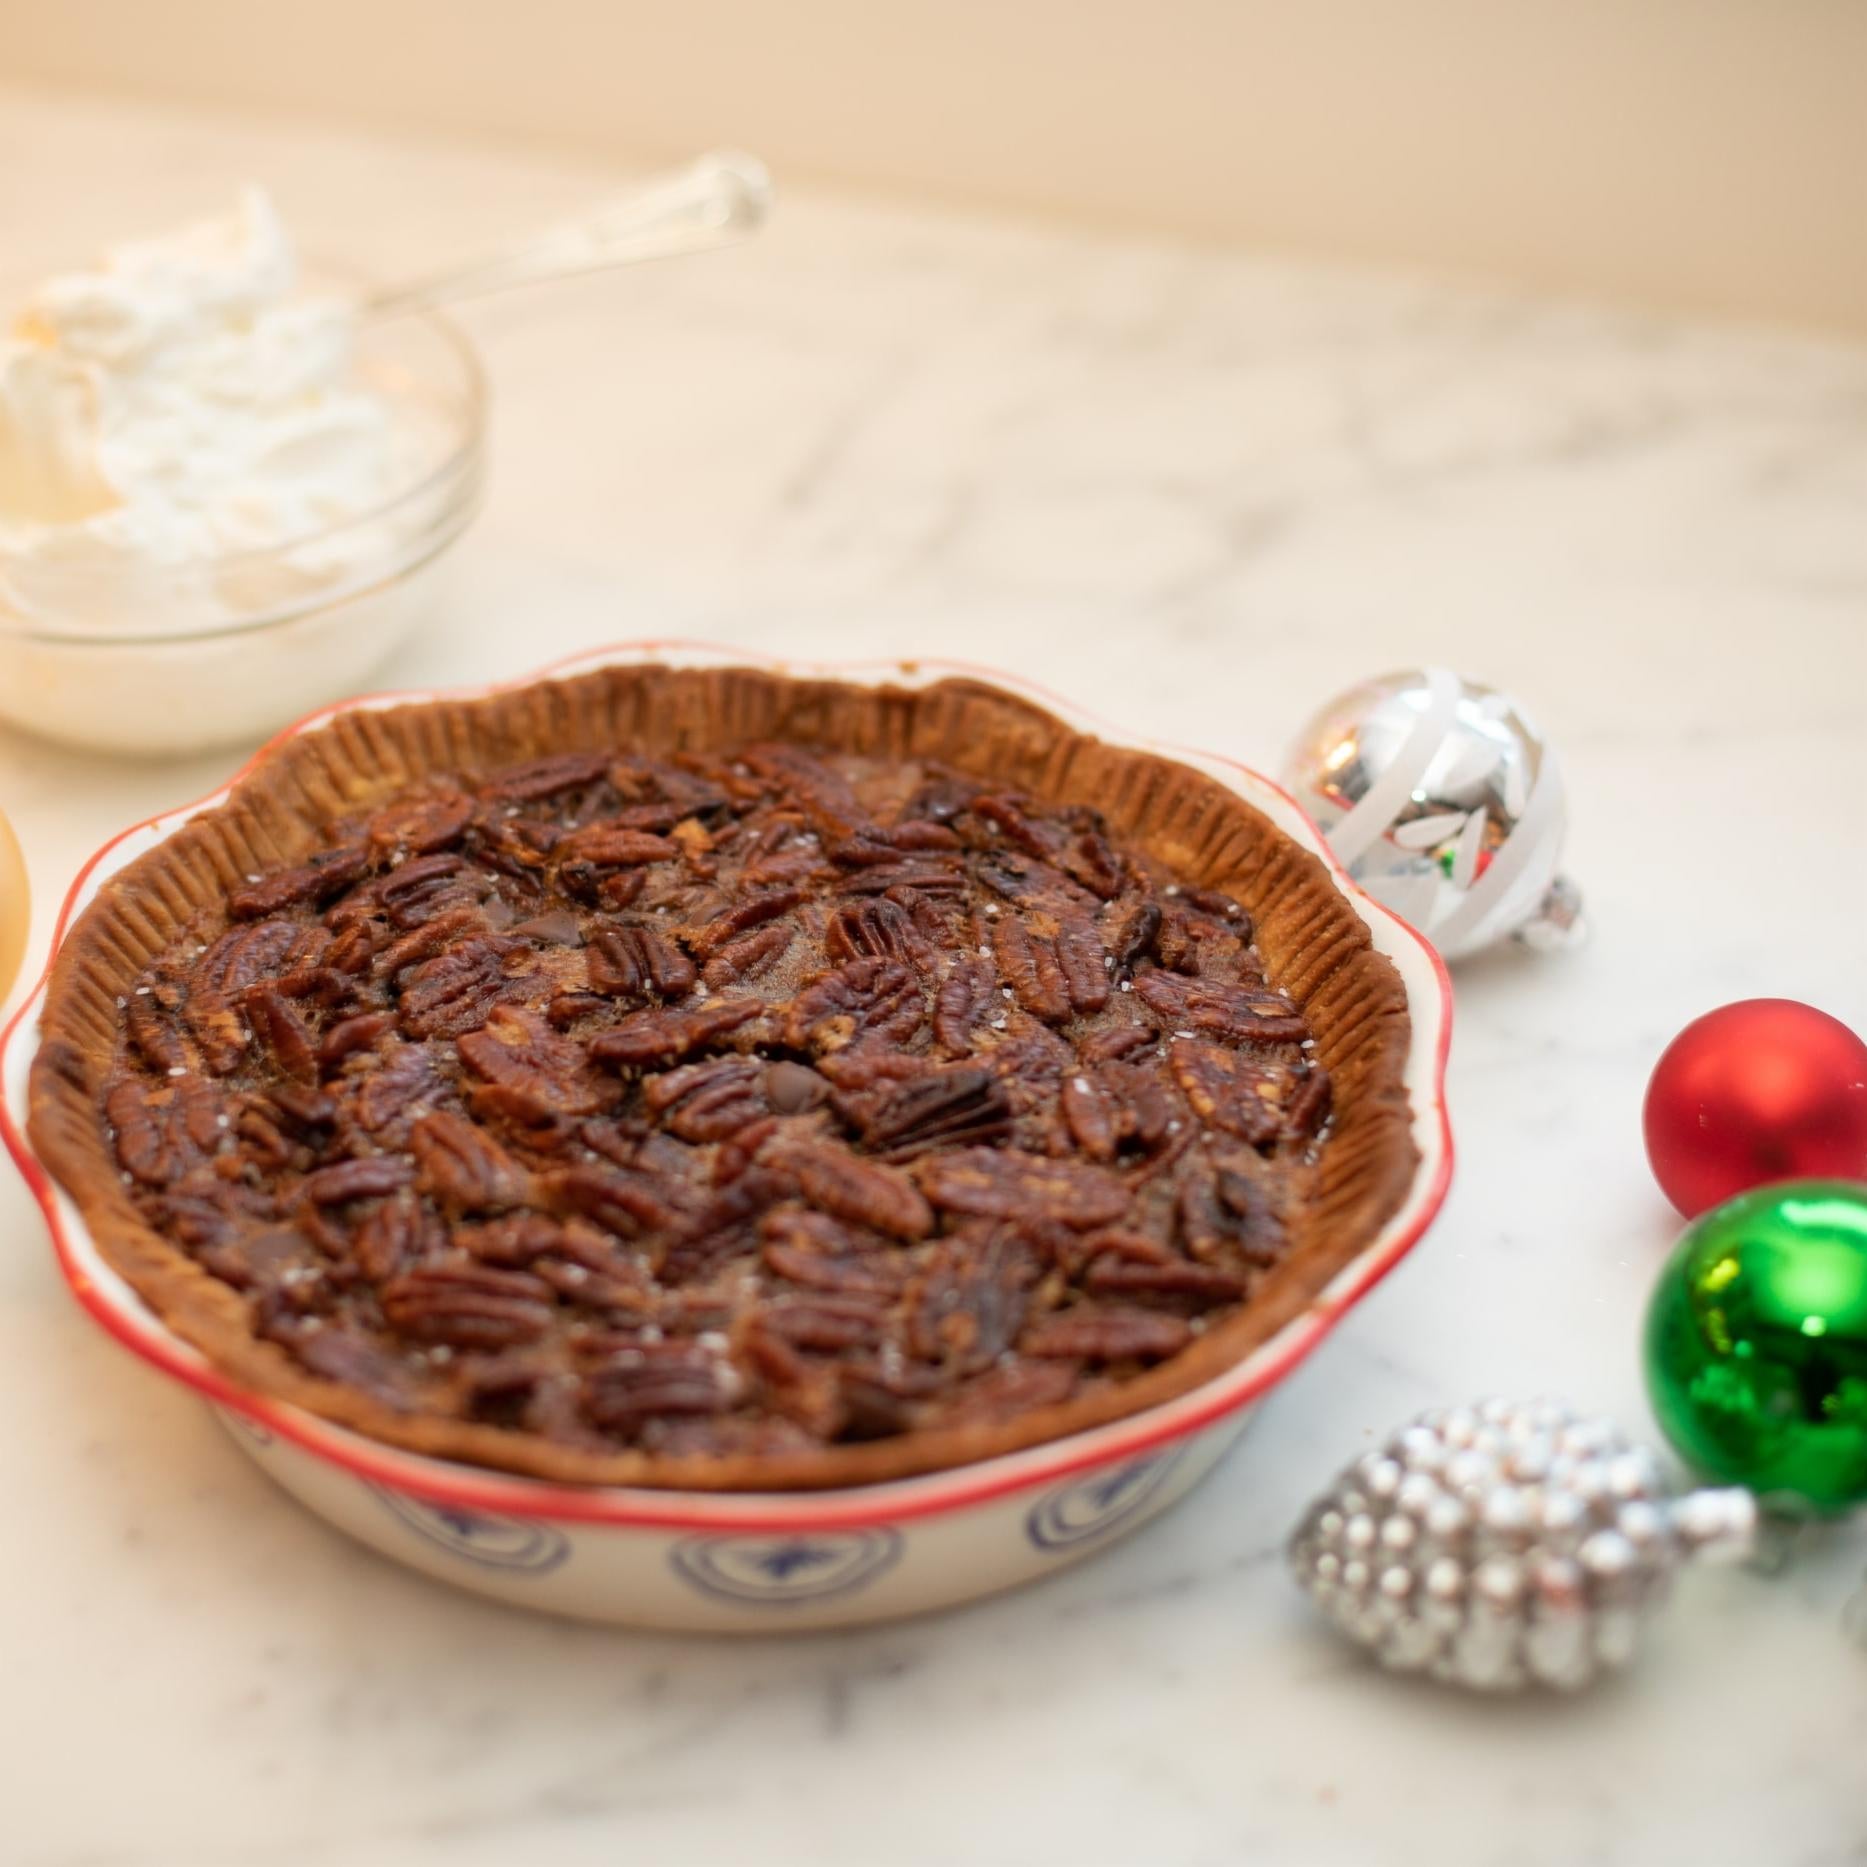 Our Favorite Holiday Maple Syrup Pecan Pie Recipe